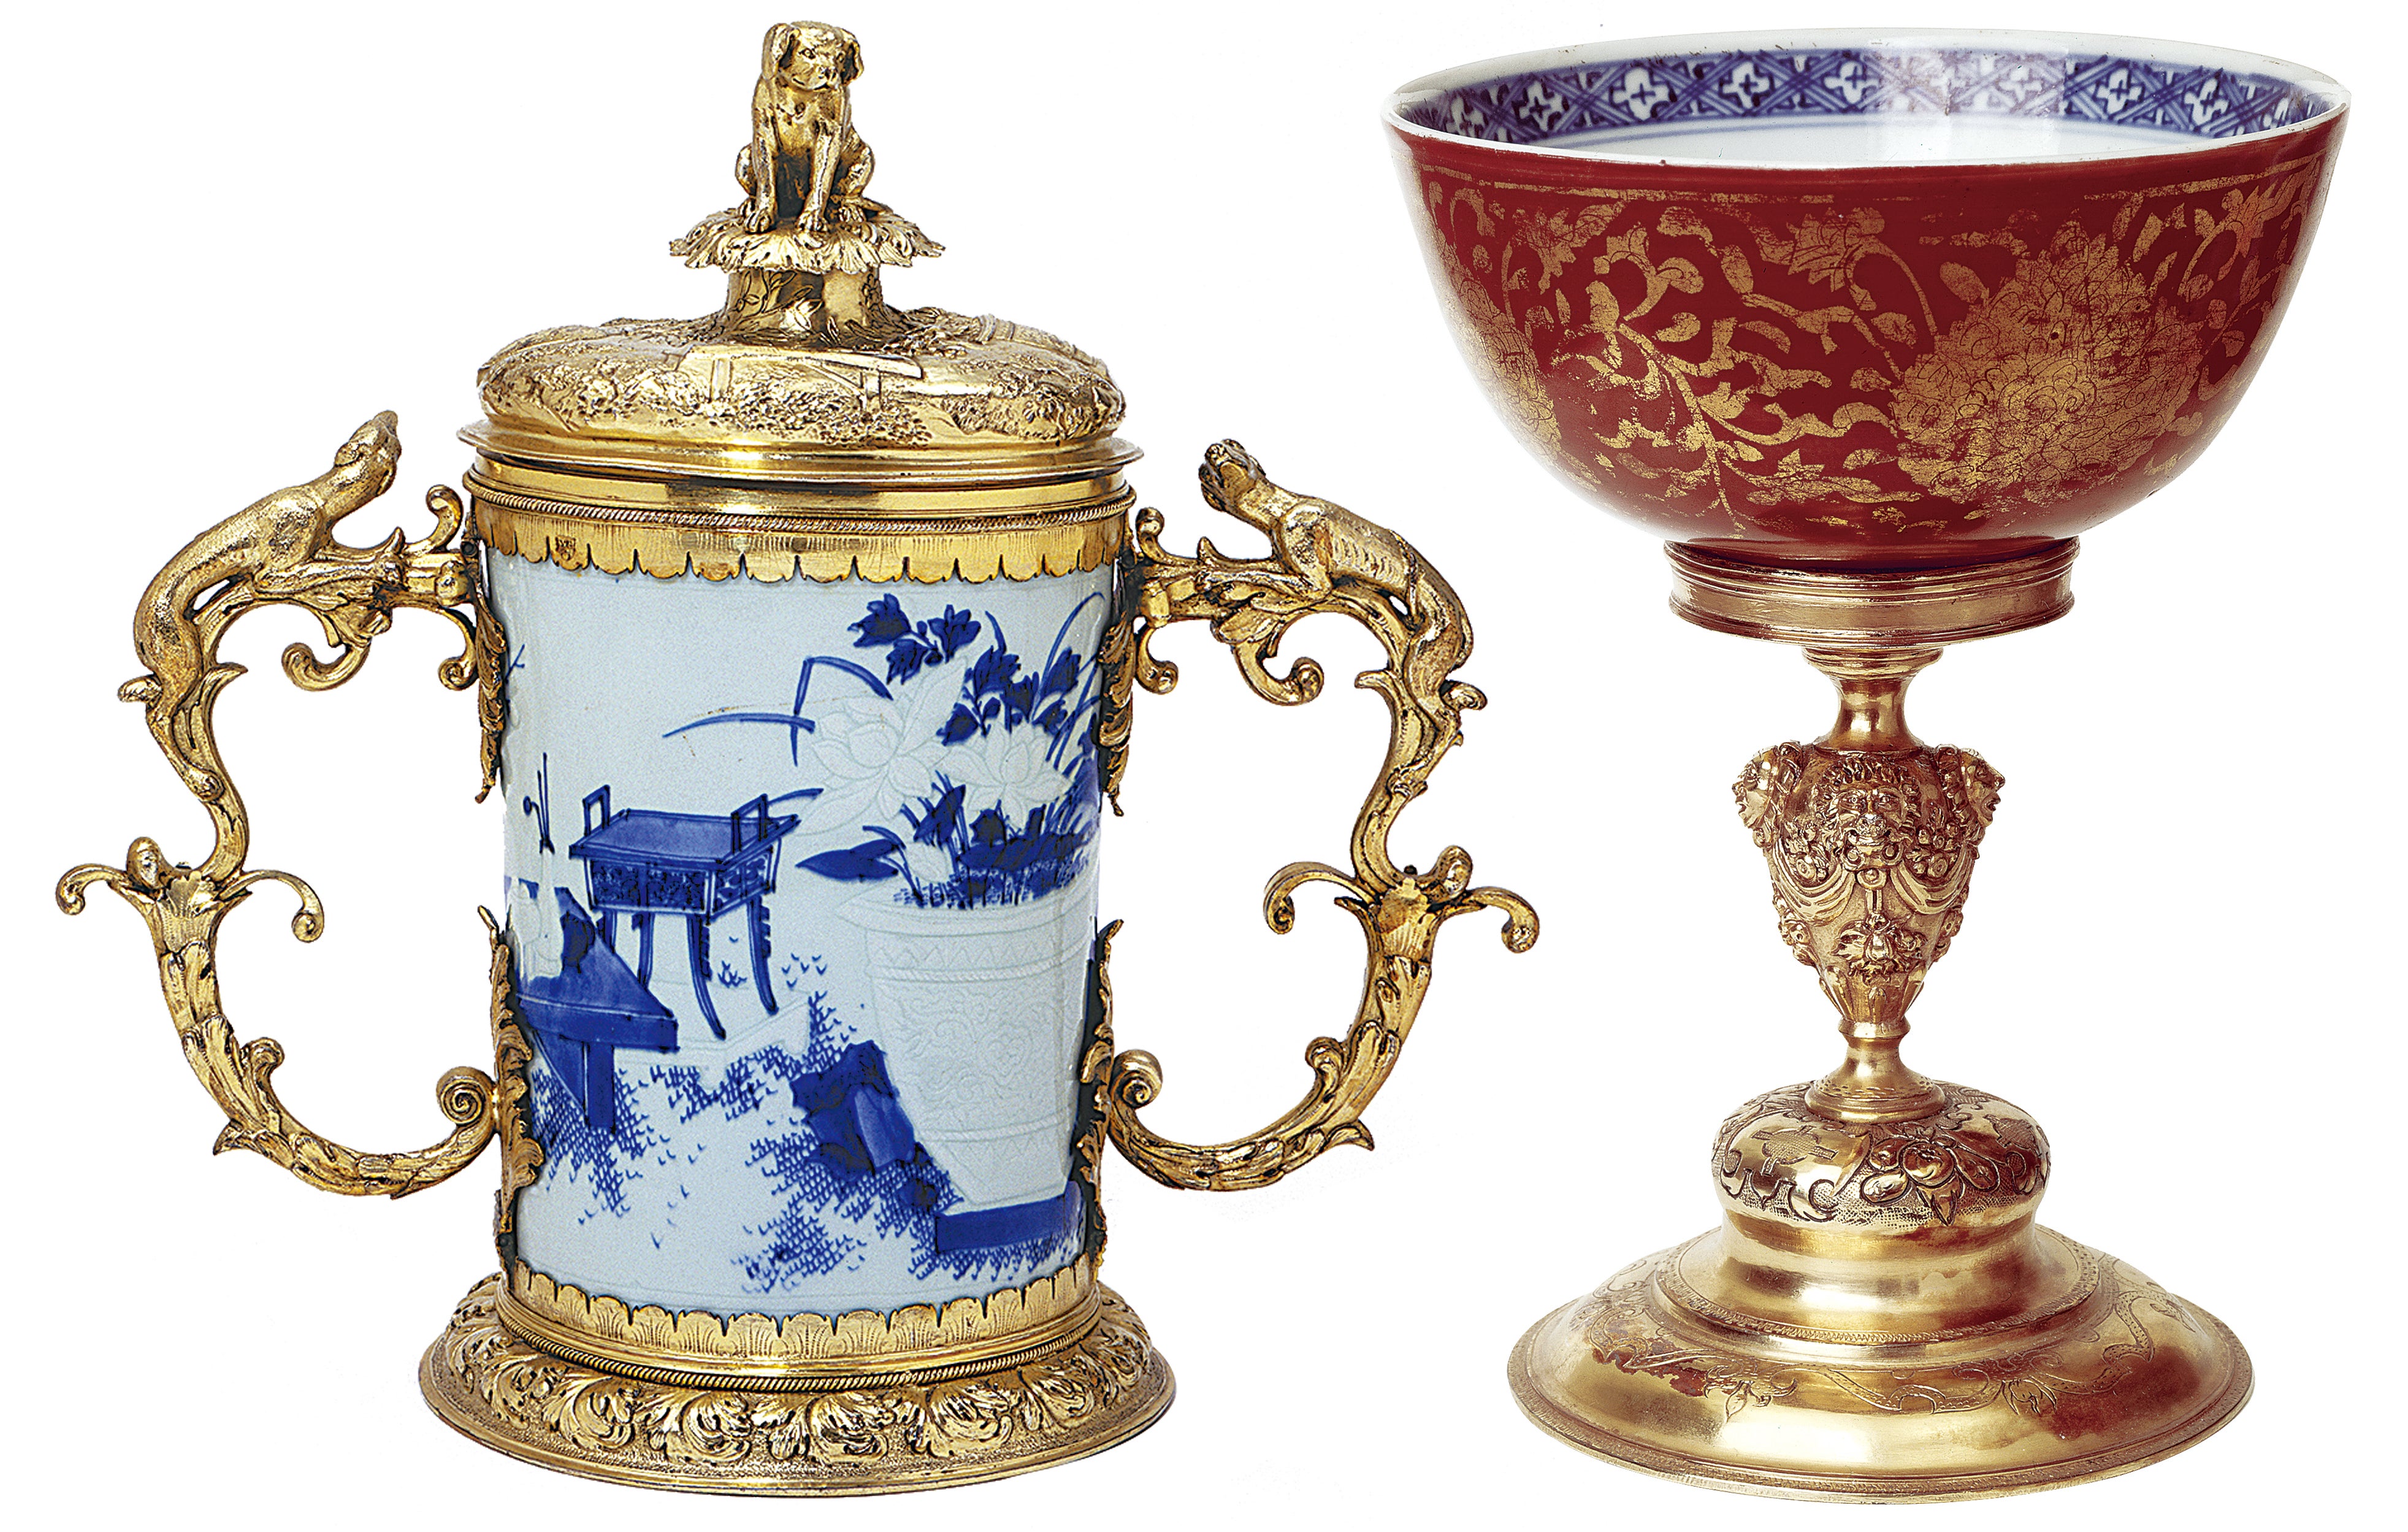 From left: The Blue-and-white Brush Pot with Antiques, Transformed into a Covered Cup, from the reign of Emperor Chongzhen (1628-44); The Blue-and-white Kinrande Bowl with Lotus Scrolls in Silver-gilt Mount, from the reign of Emperor Jiajing (1522-66)